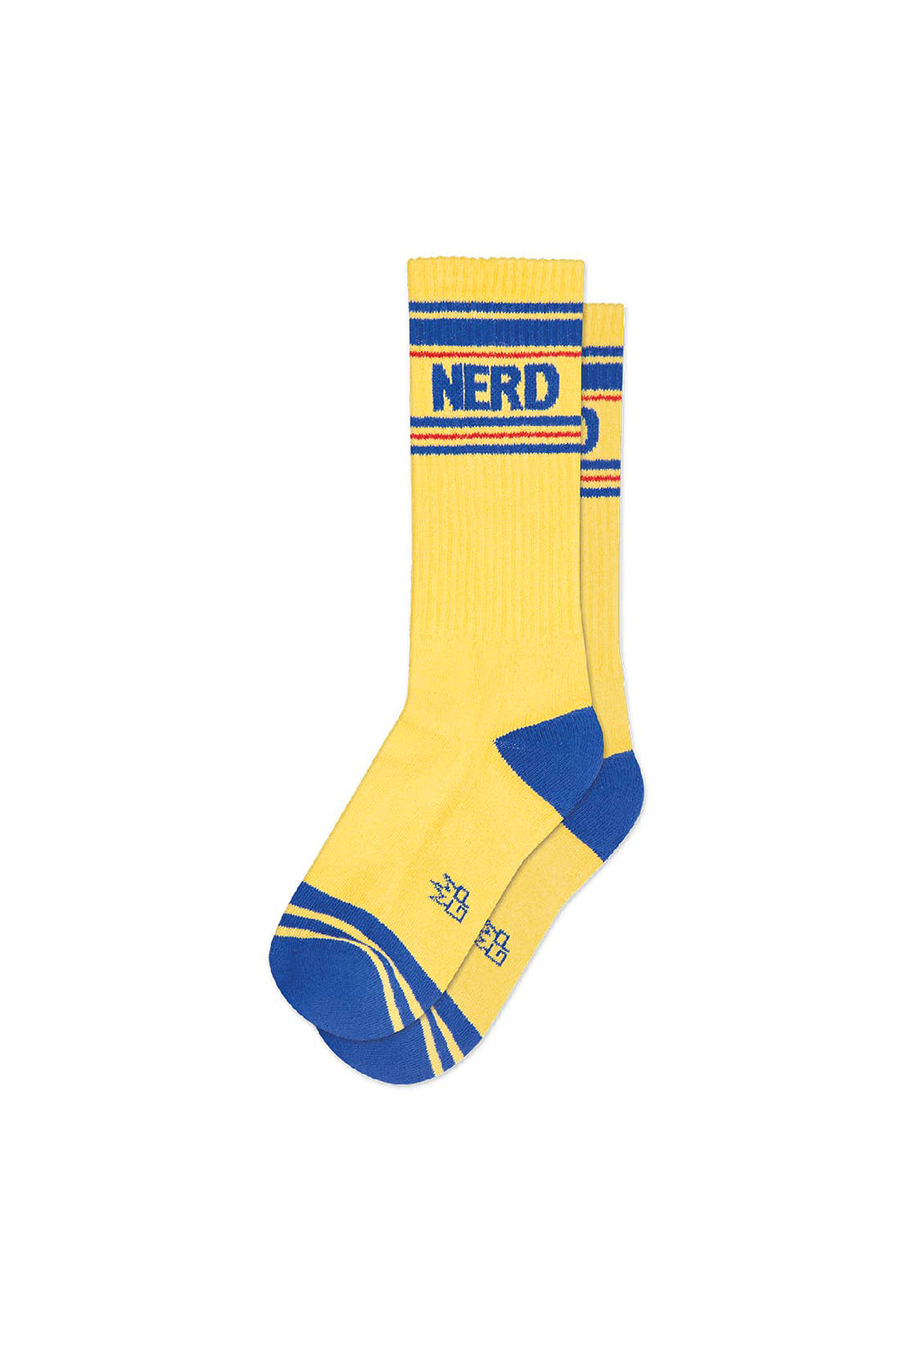 Nerd Ribbed Gym Sock - Main Image Number 1 of 1